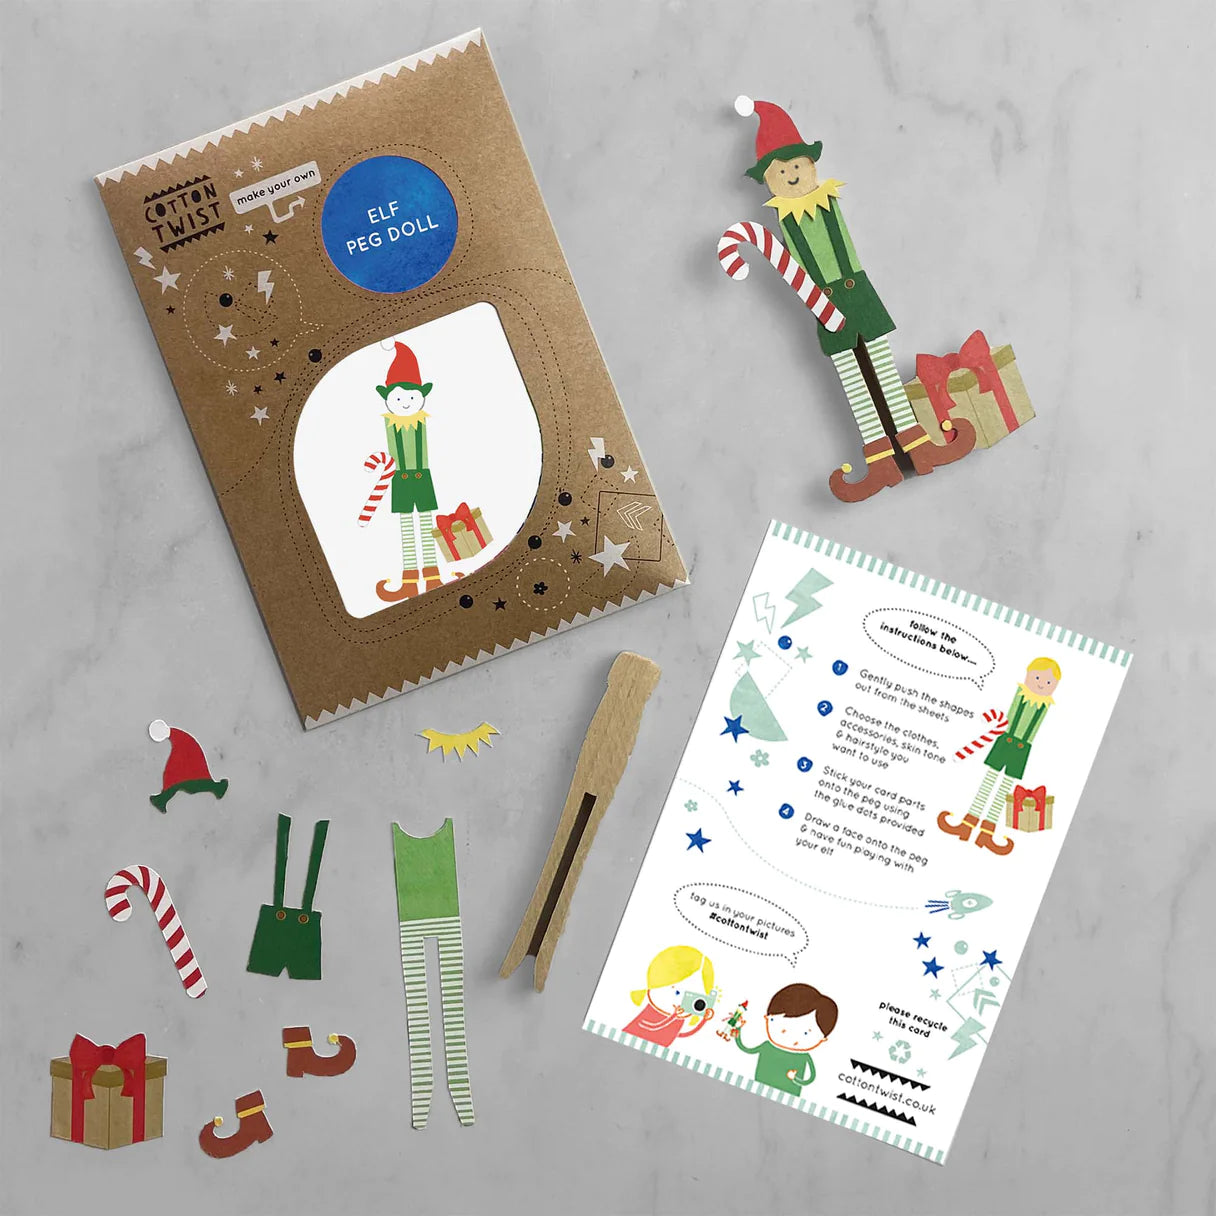 Cotton Twist Make Your Own - Elf Peg Doll Kit - Little Reef and Friends